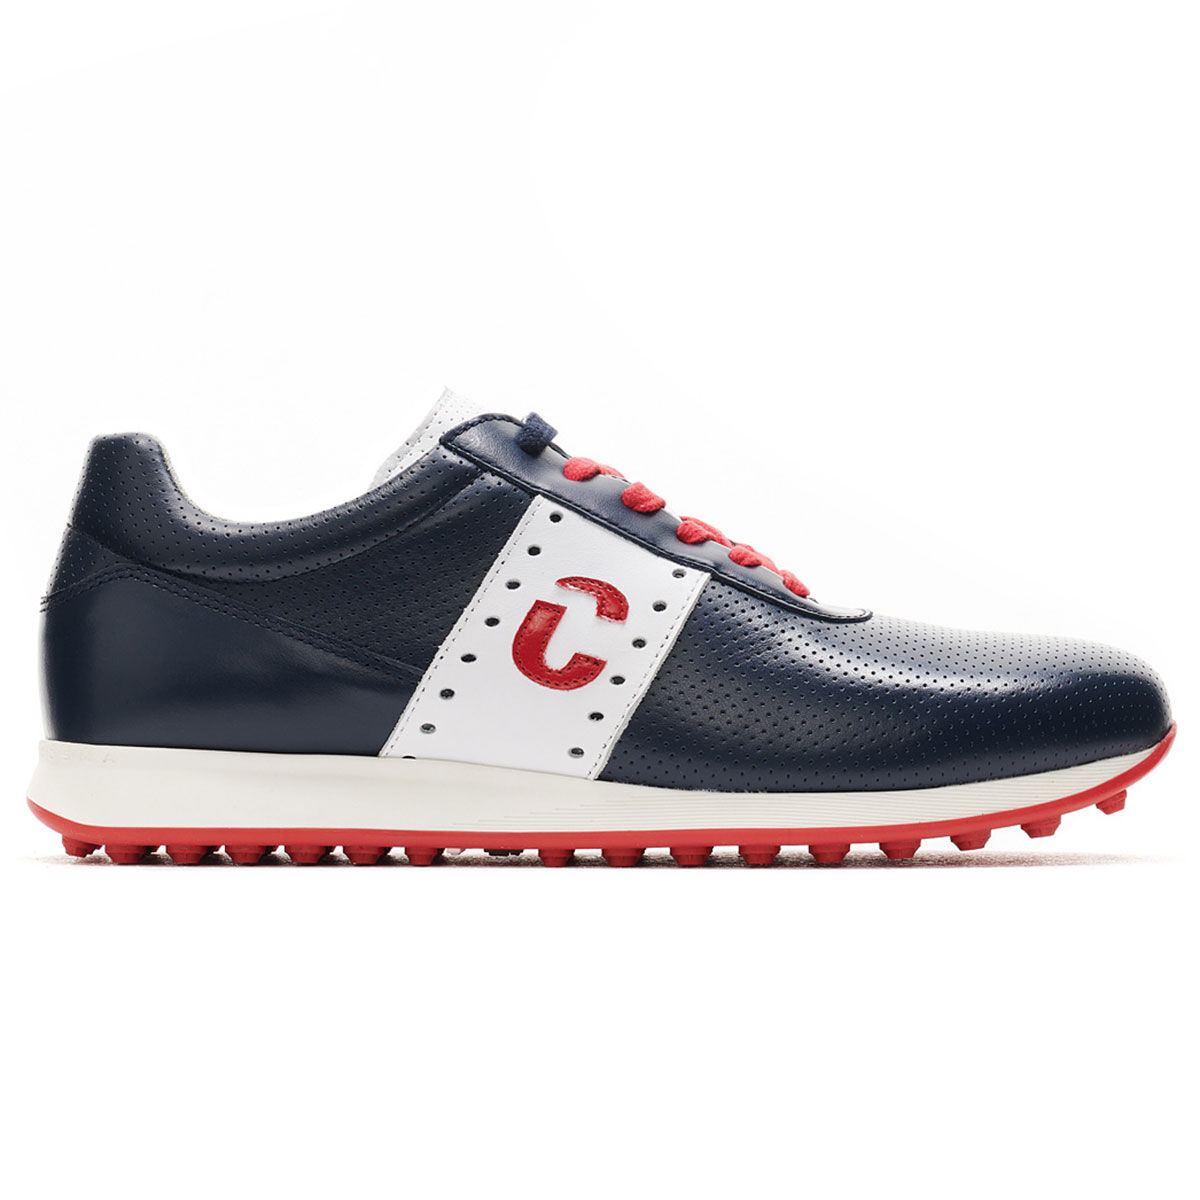 Duca Del Cosma Blue, White and Red Colour Block Belair Waterproof Spikeless Golf Shoes, Size: 6 | American Golf